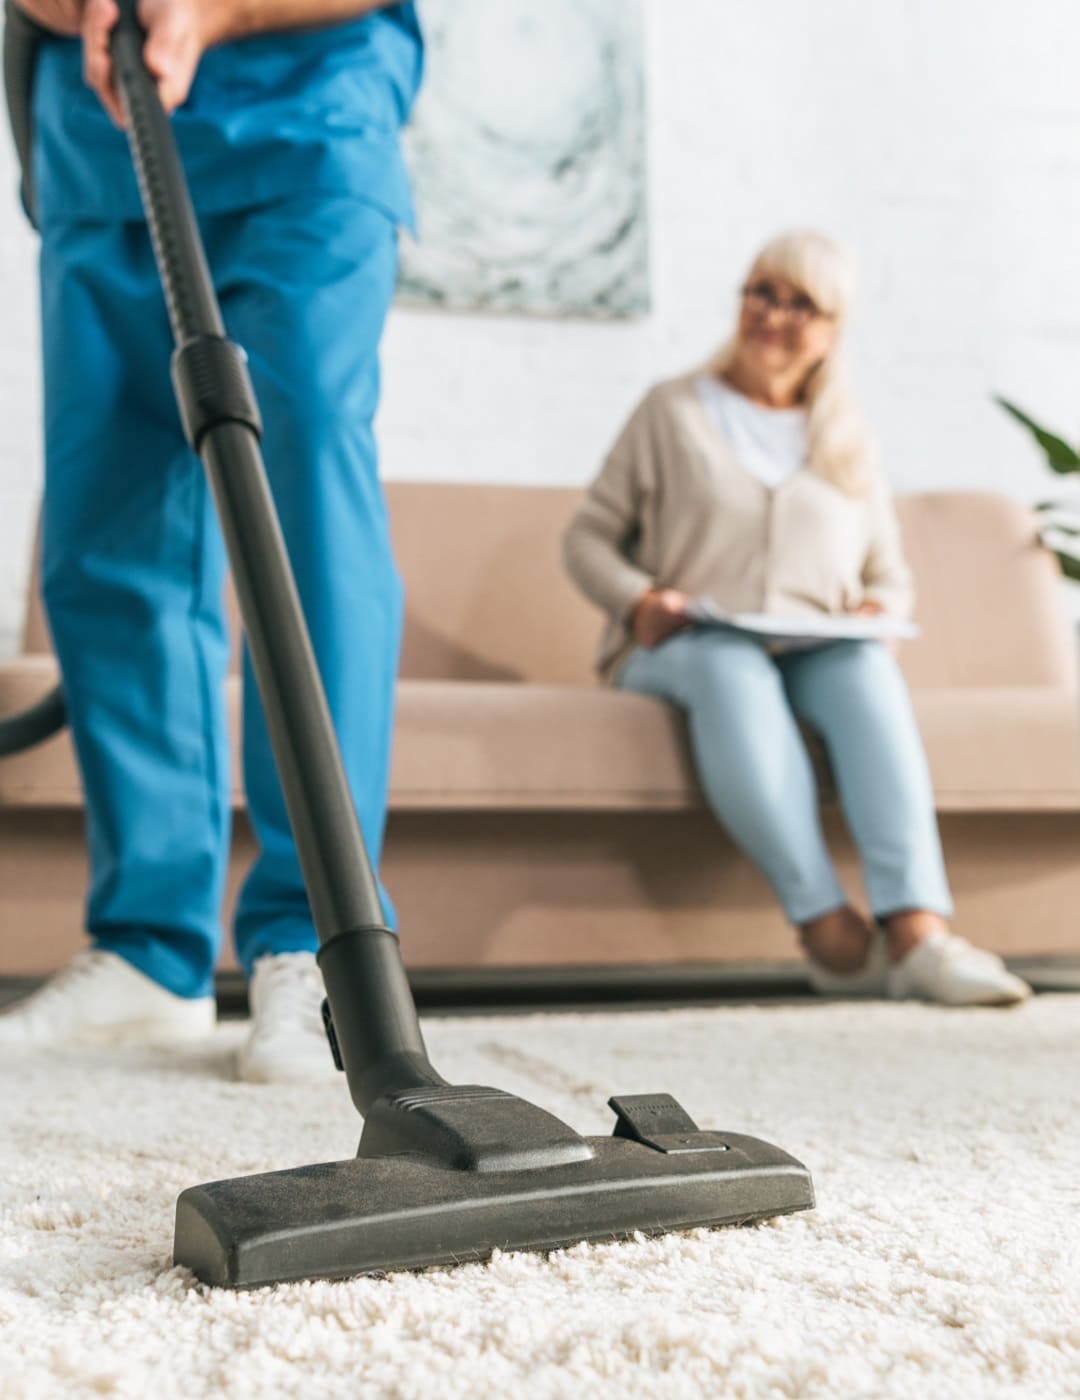 Carpet cleaner performing NDIS service